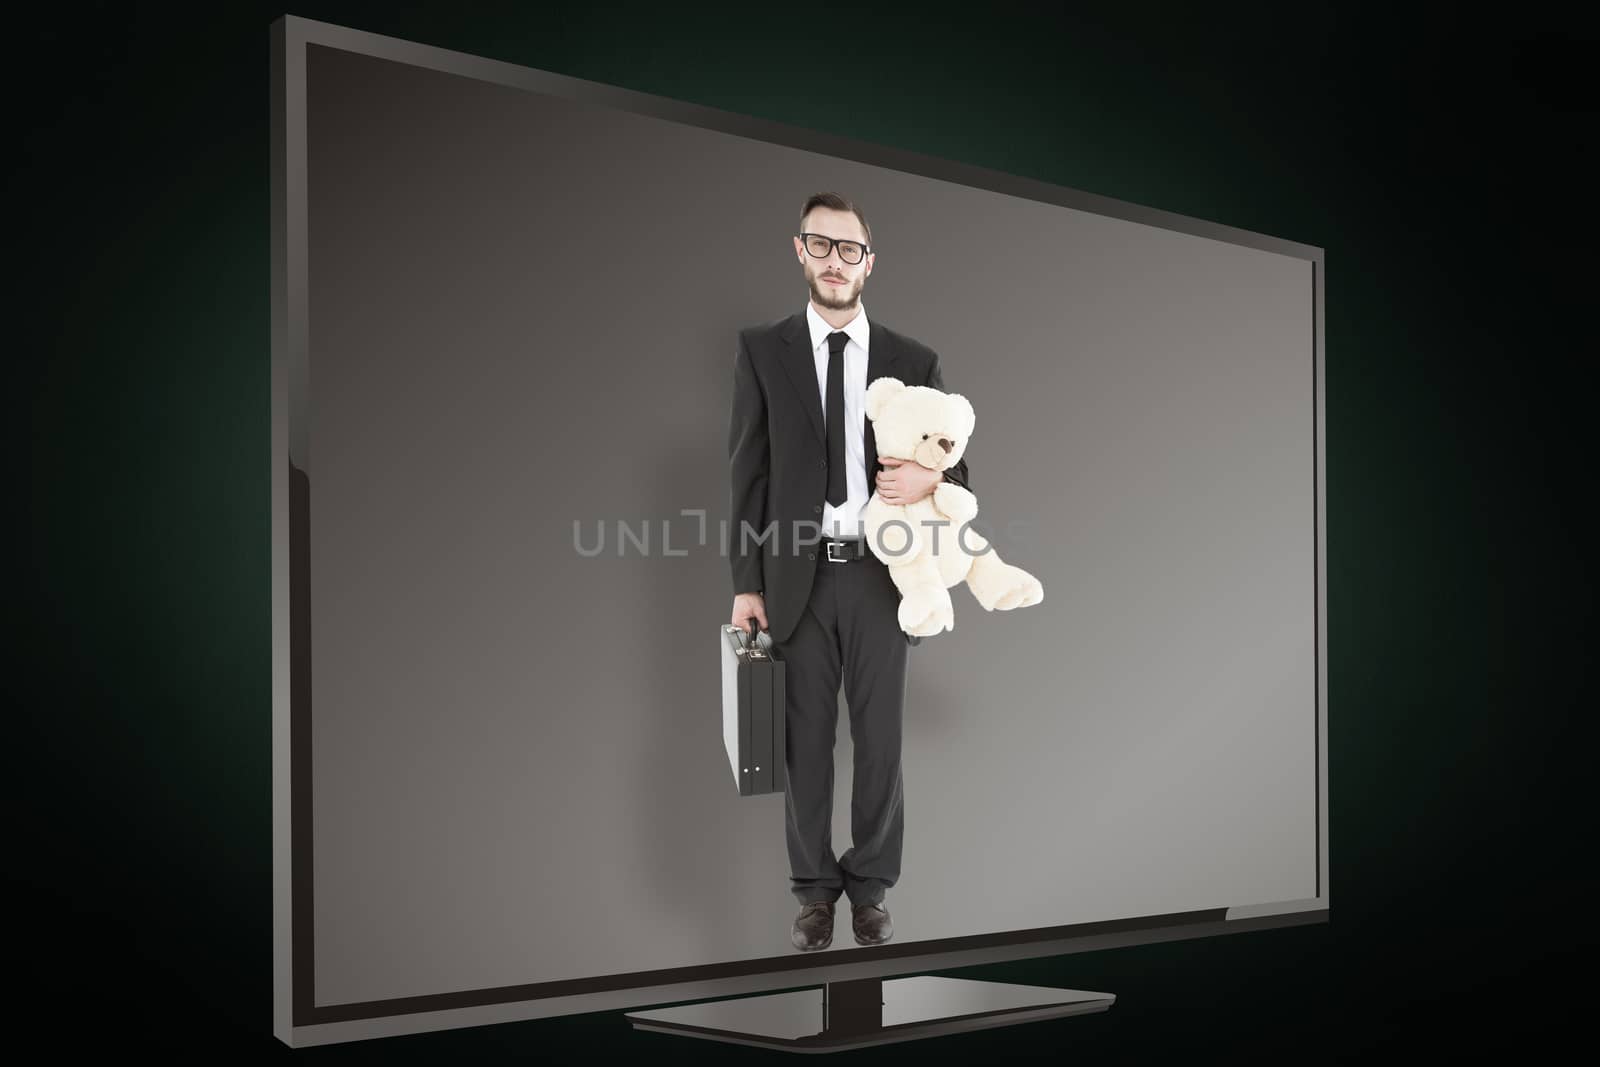 Geeky businessman holding briefcase and teddy against green background with vignette